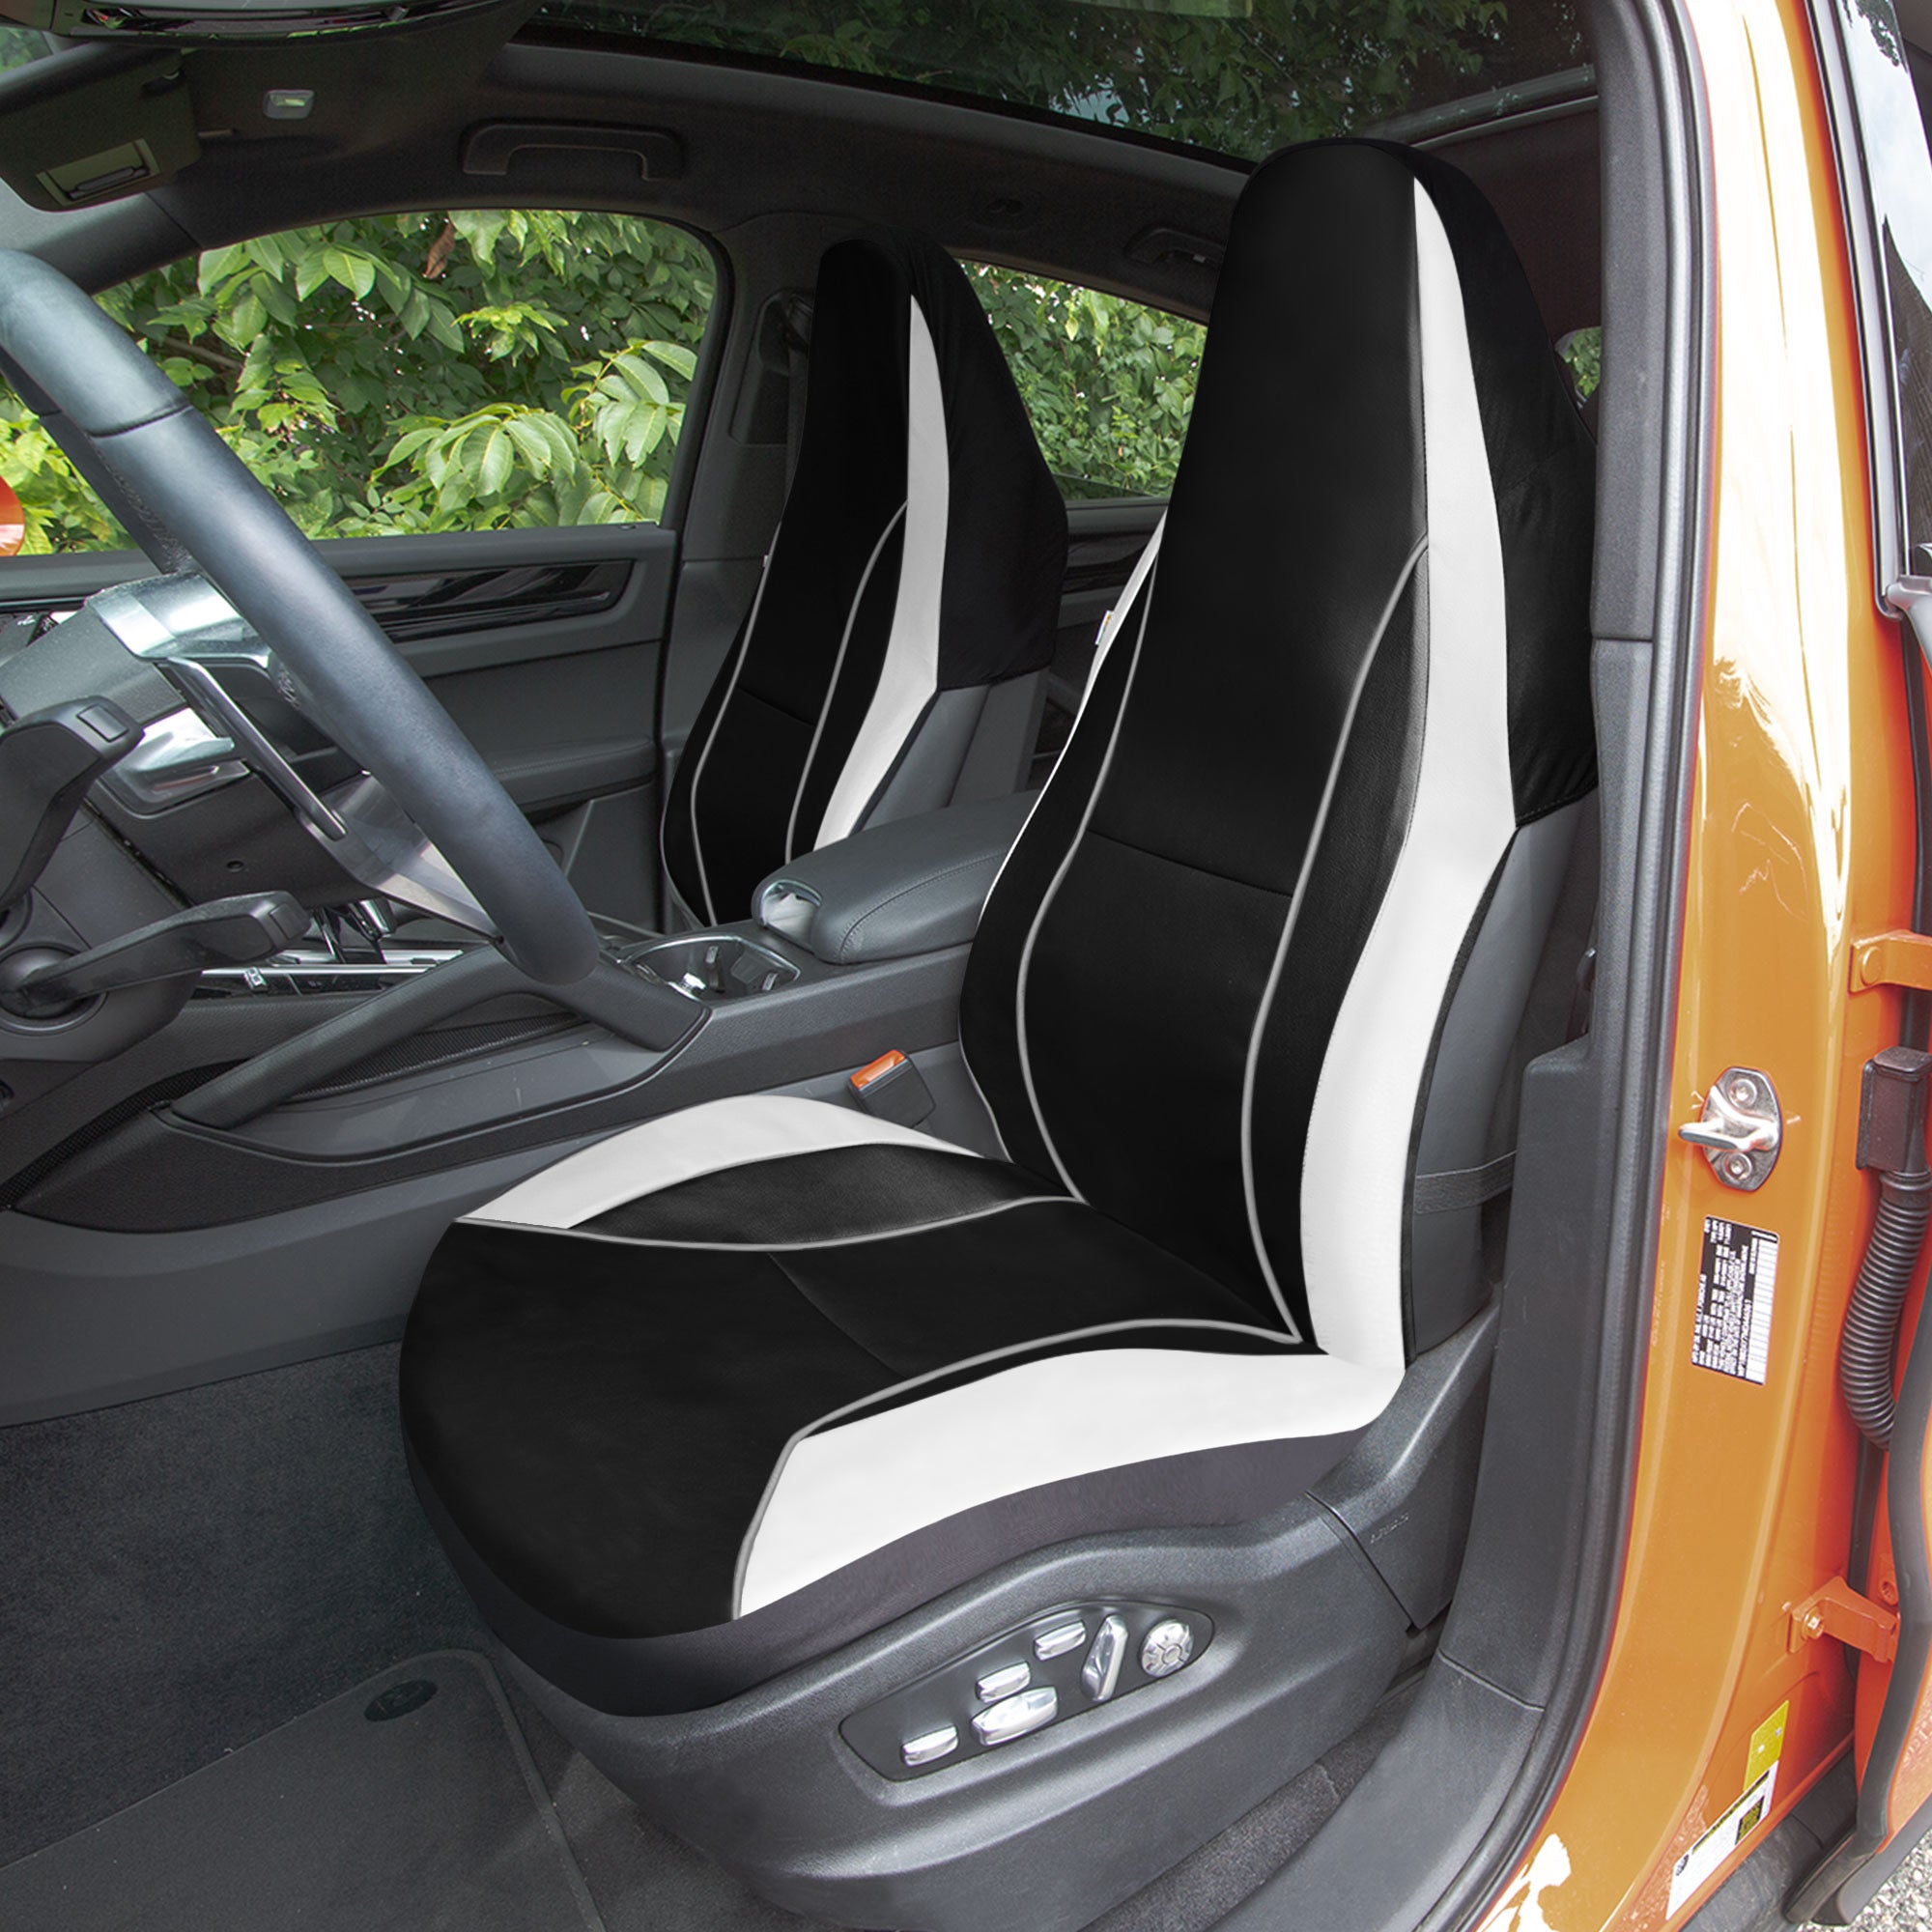 Bold Contrasting Leatherette Seat Covers Full Set - Gray